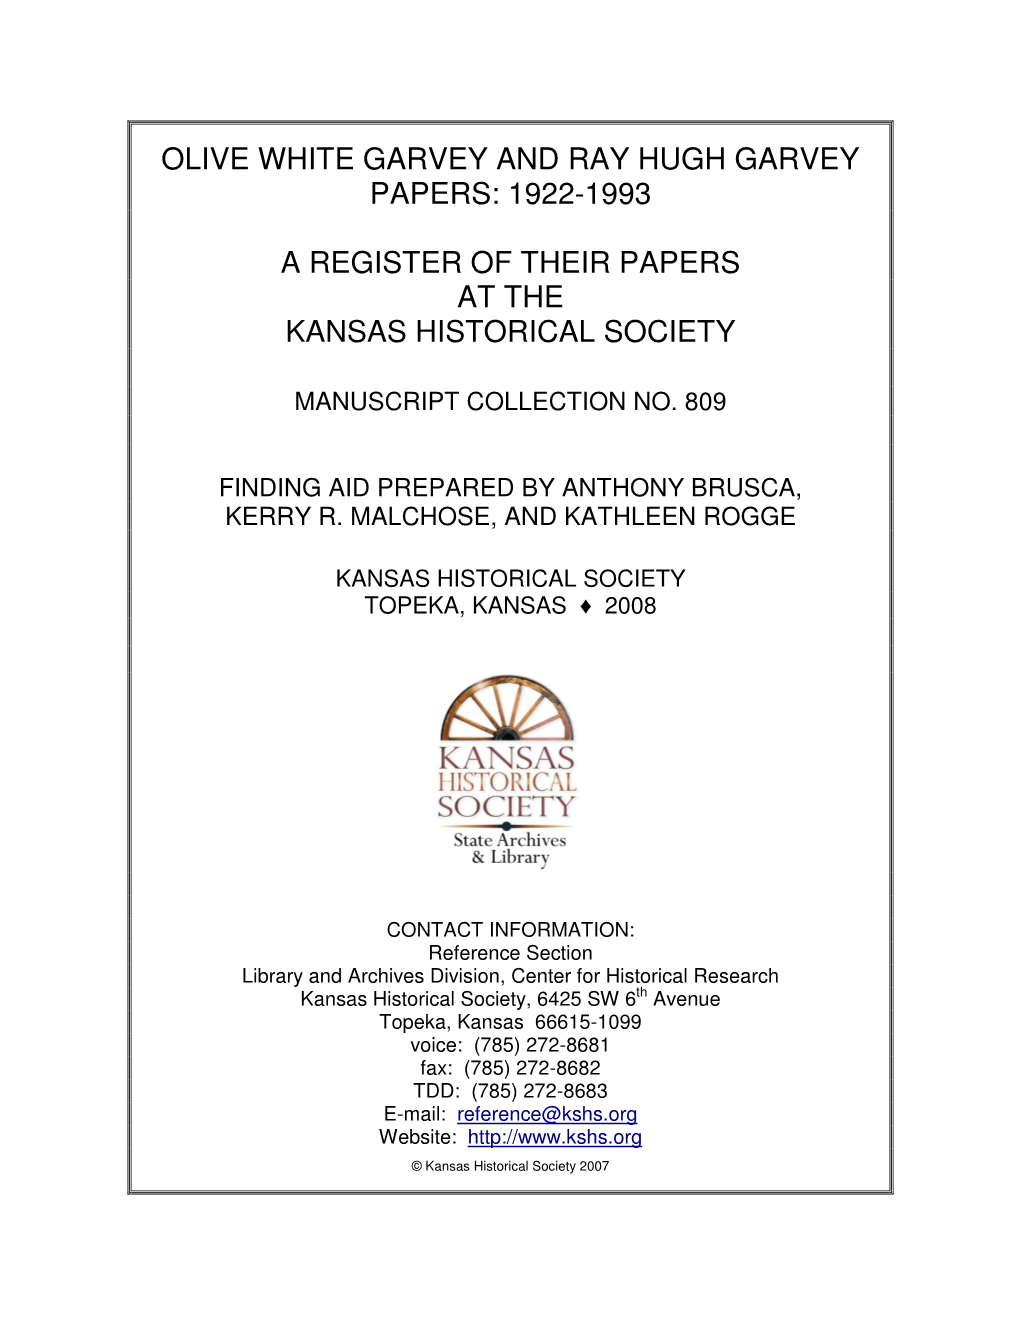 Olive White Garvey and Ray Hugh Garvey Papers: 1922-1993 a Register of Their Papers at the Kansas Historical Society